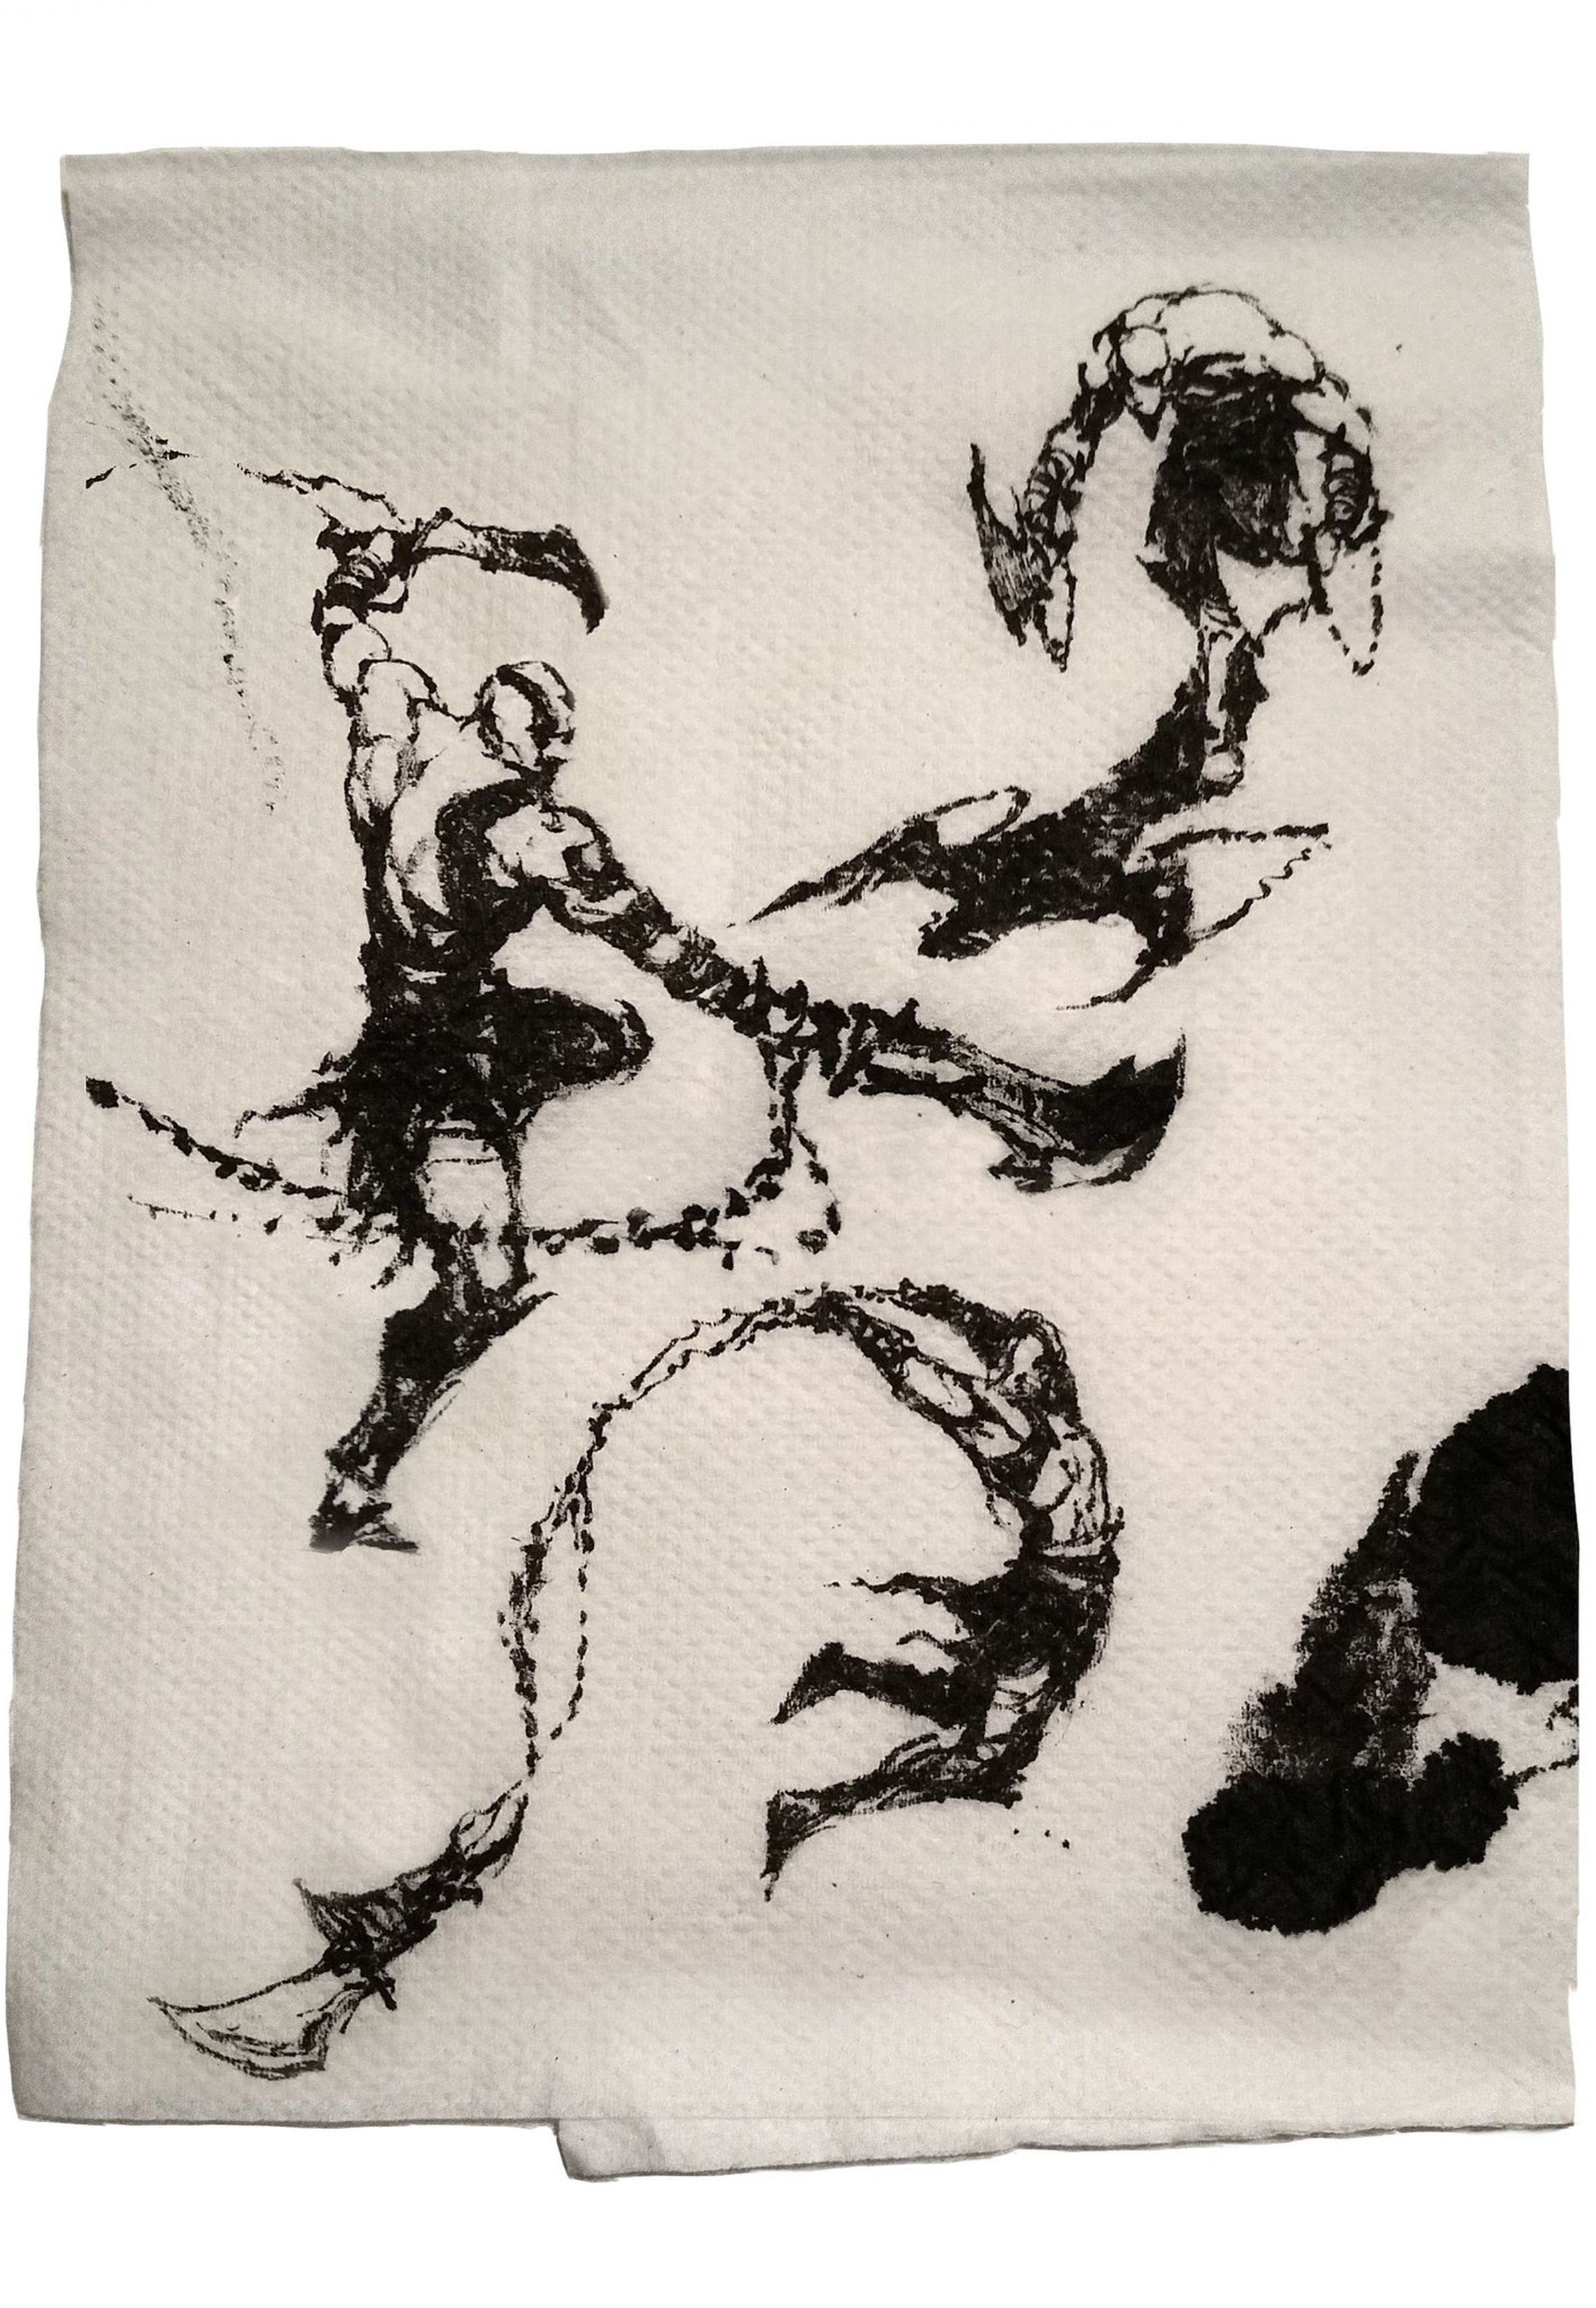 Image of a napking featuring several sketches of Kratos drawn in black ink.